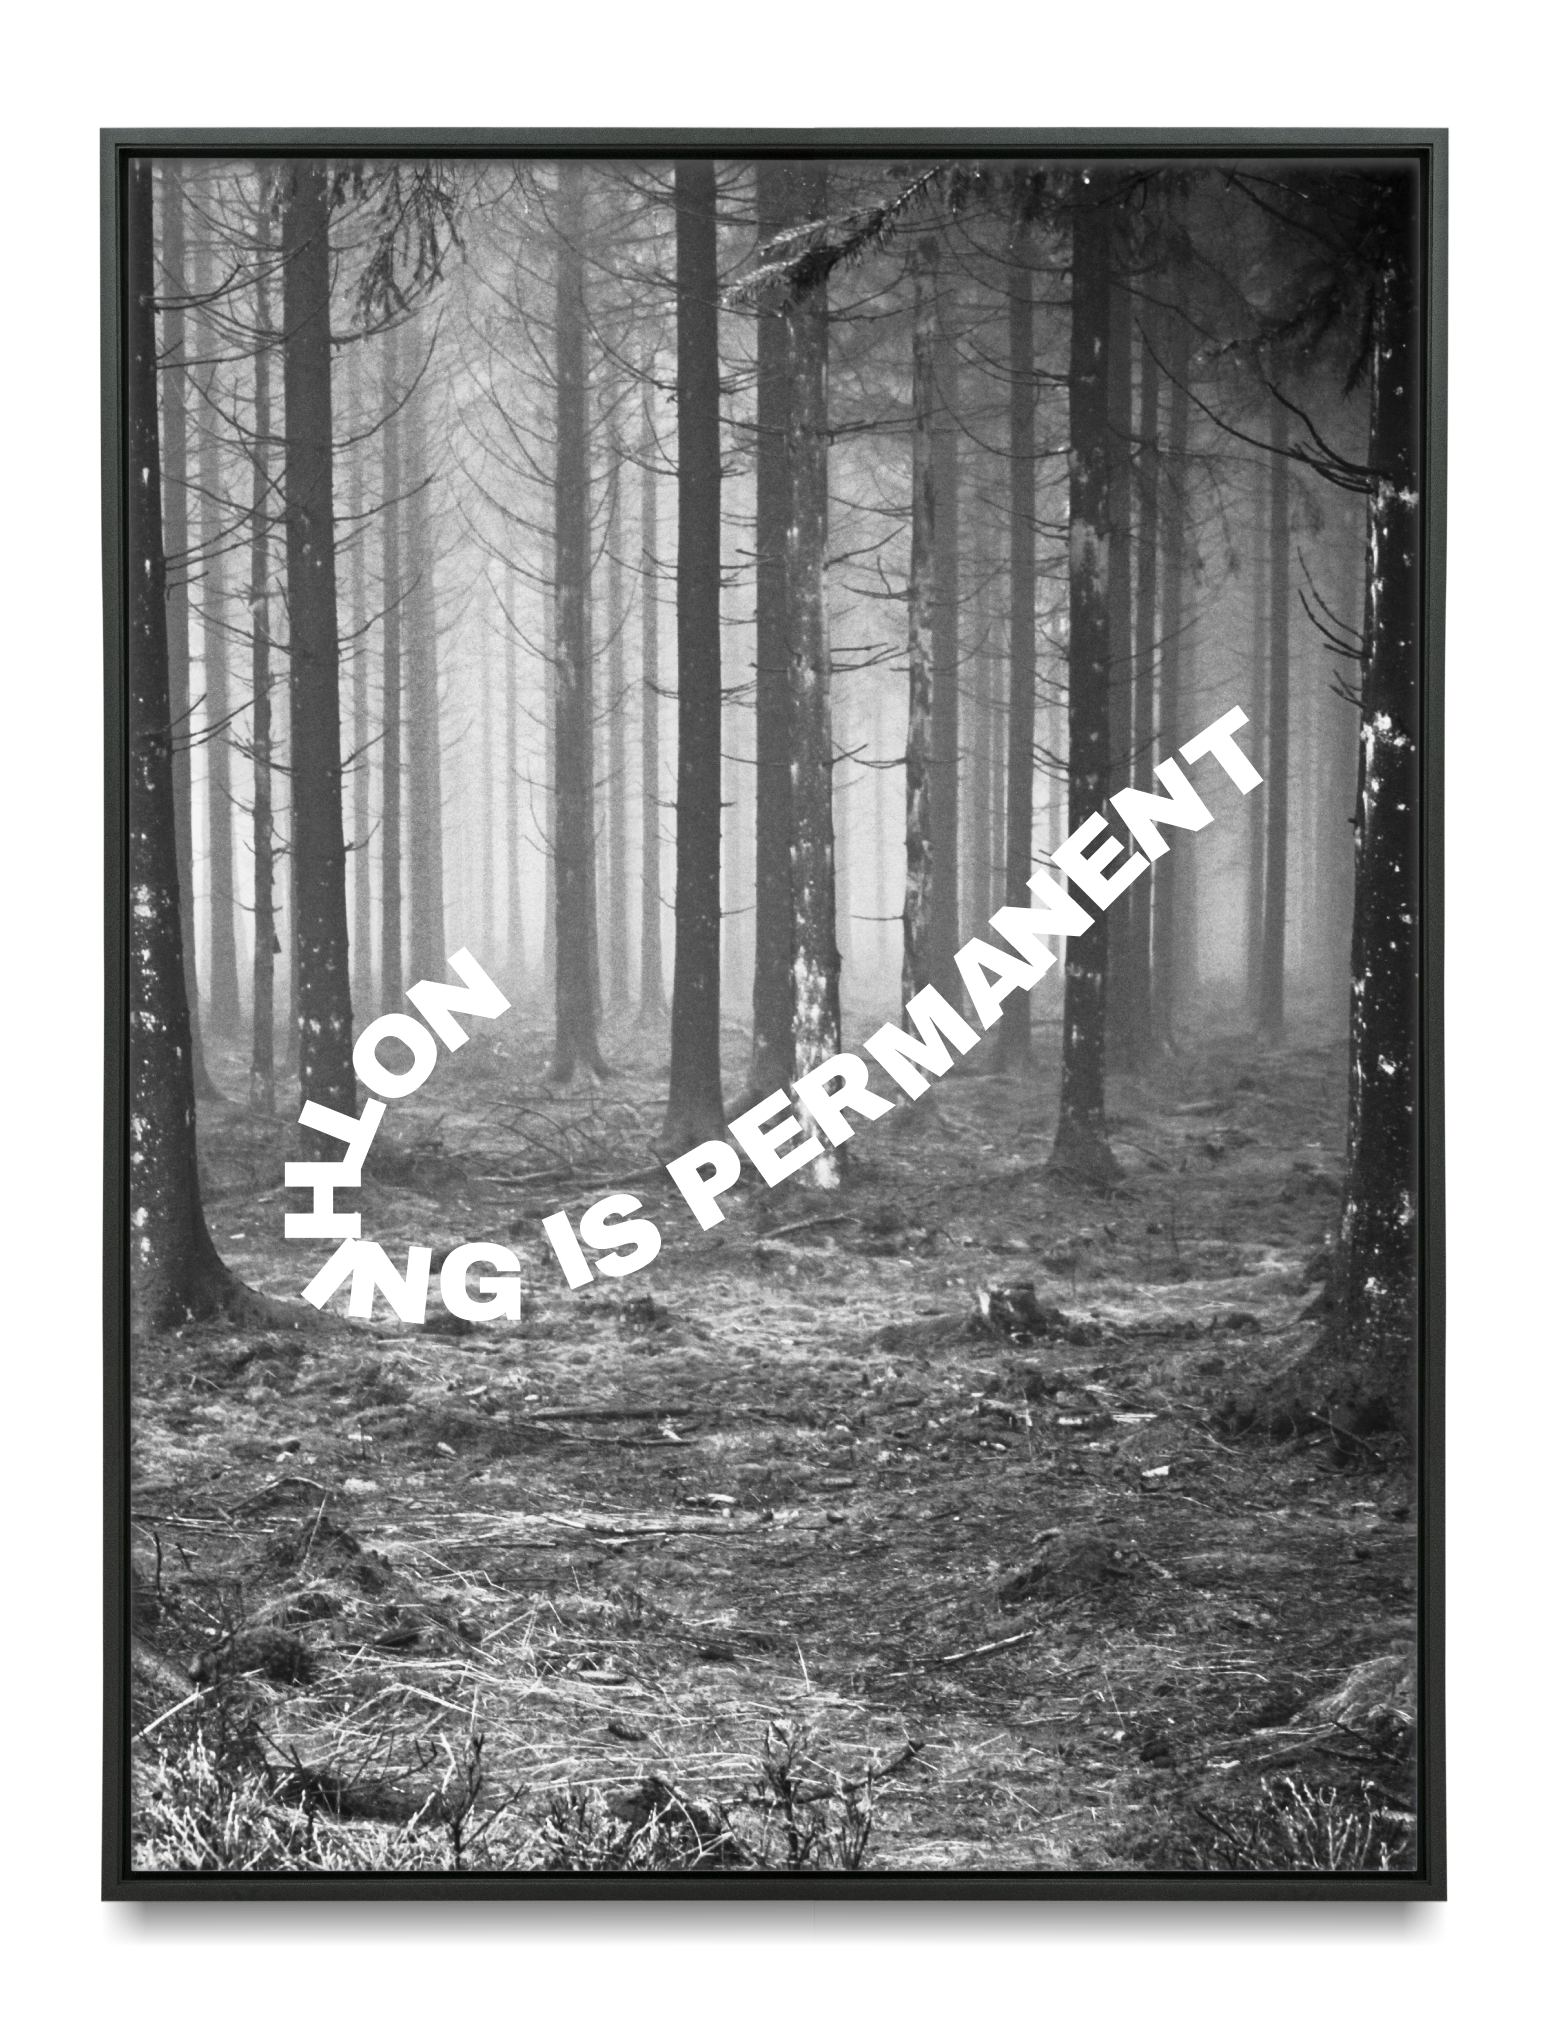 Forest Nothing Is Permanent Poster for Room Teen | Alt Room Decor | Cool Posters & Grunge Room Decor | Aesthetic Posters Wall Decor | UNFRAMED